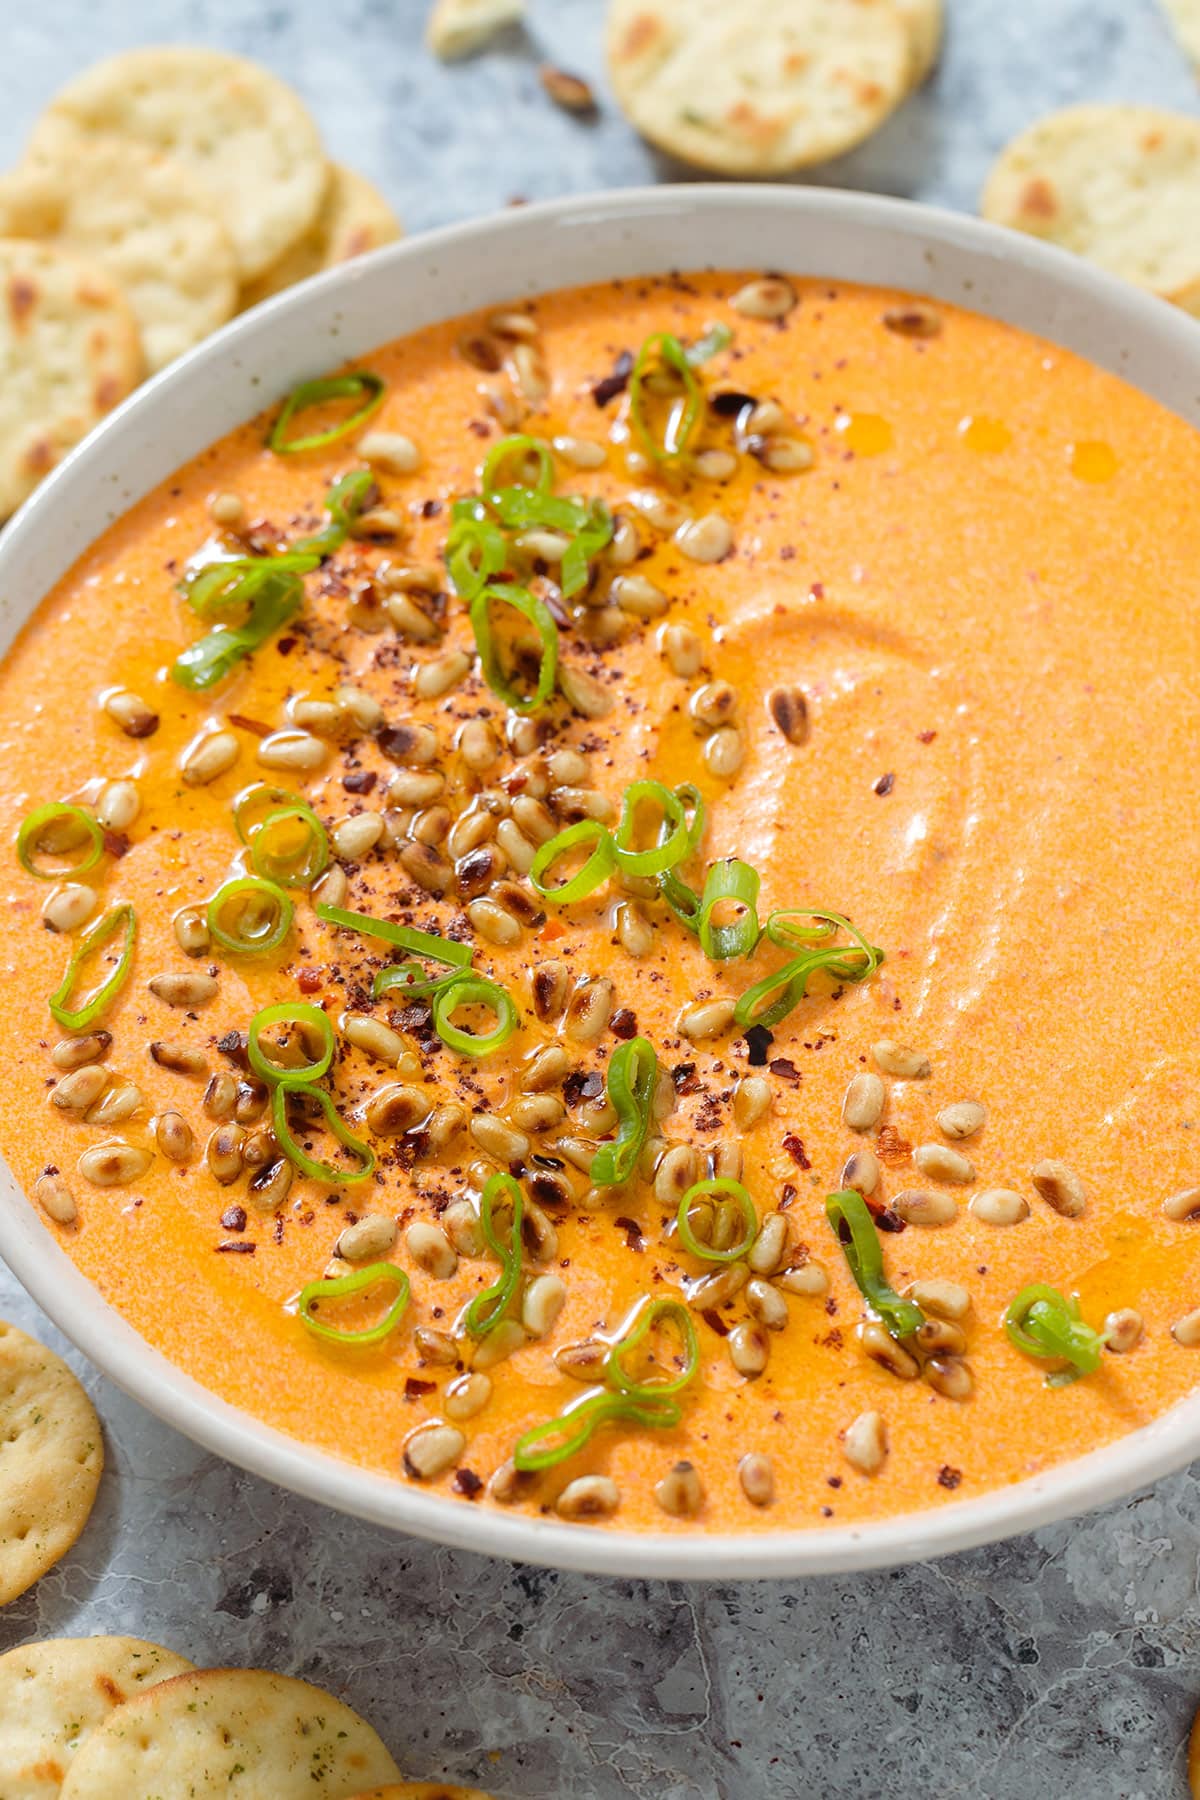 Bright orange dip in a beige bowl garnished with toasted pine nuts, spring onion, and ground sumac, with round crackers around the bowl.